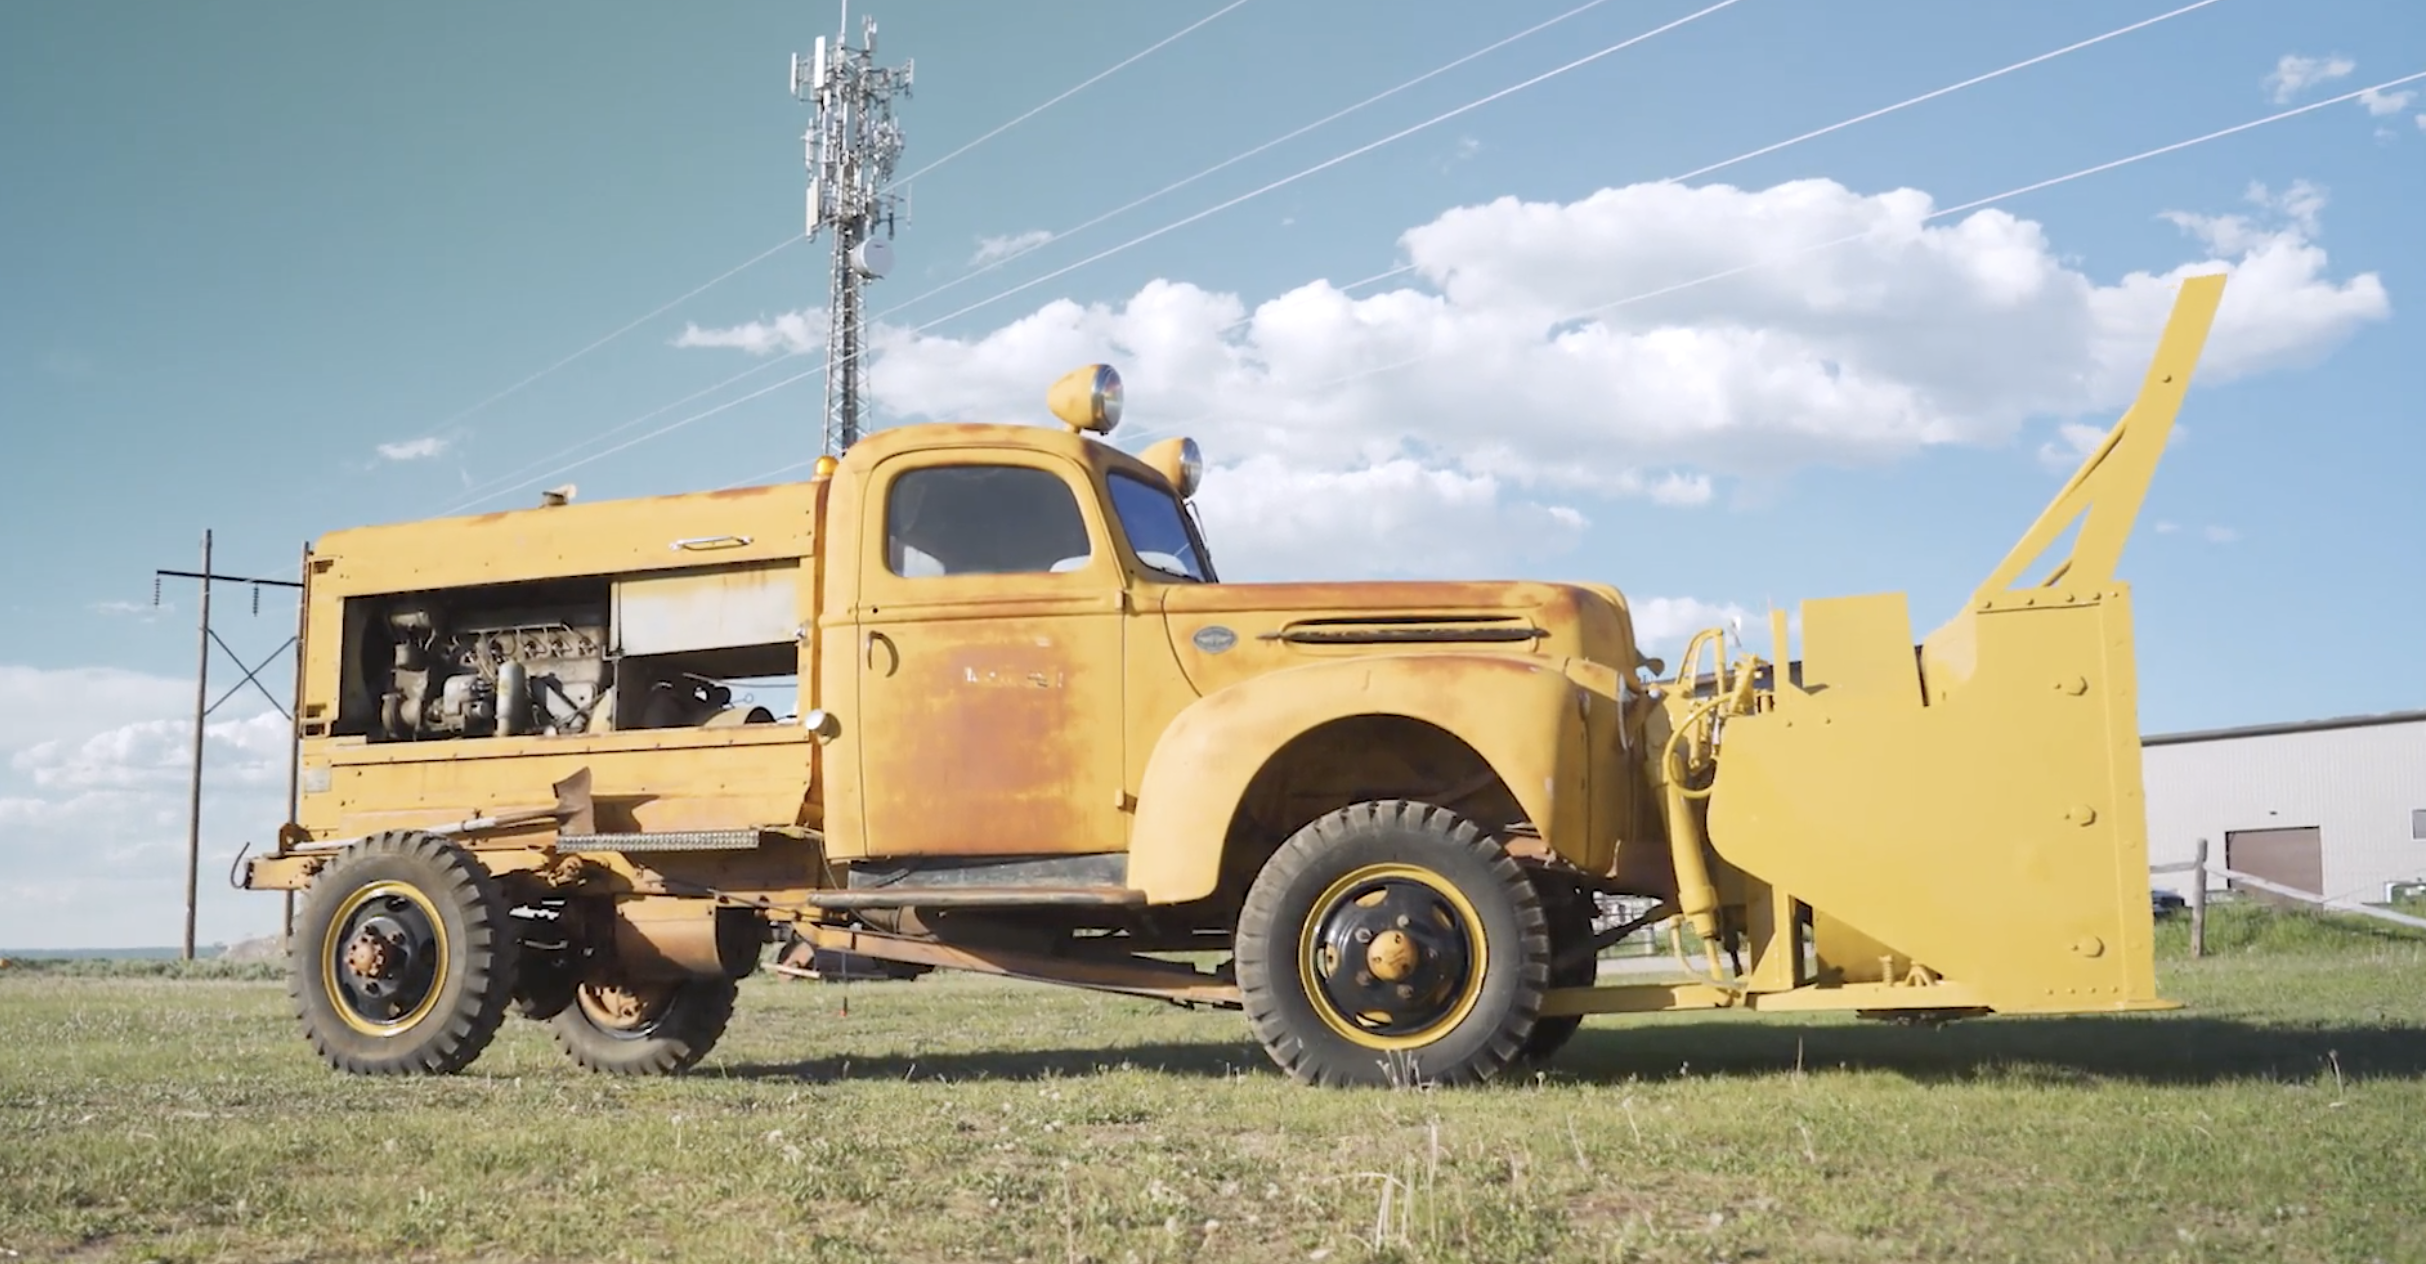 This Old Truck: 1942 Ford SnoGo | THE SHOP